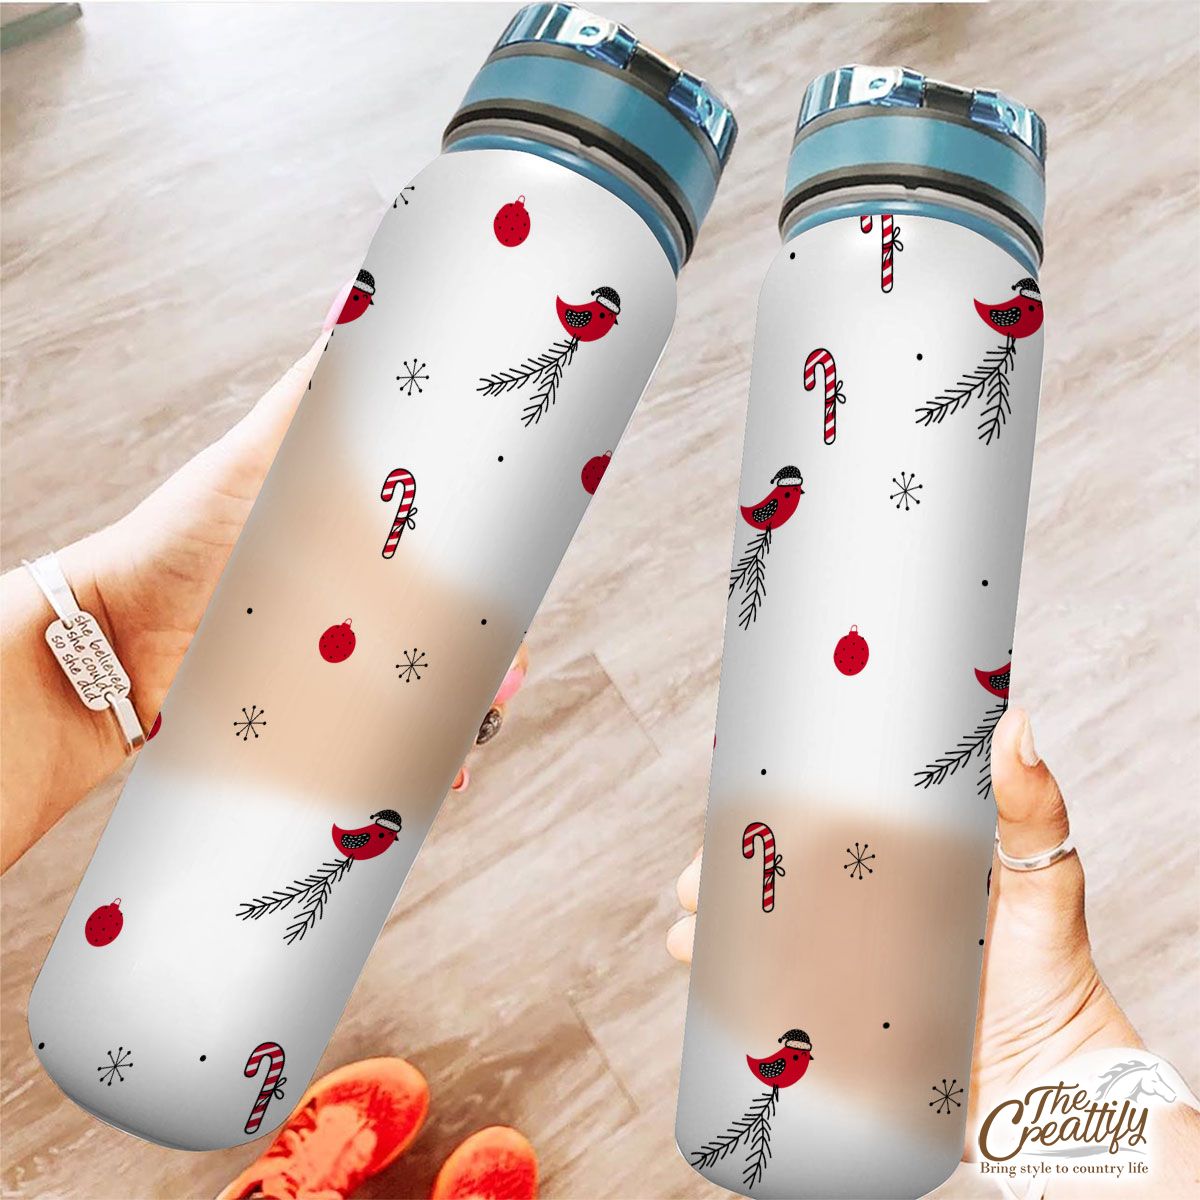 Cardinal Bird With Santa Hat, Candy Canes, Christmas Balls And Snowflake Clipart Seamless White Pattern Tracker Bottle